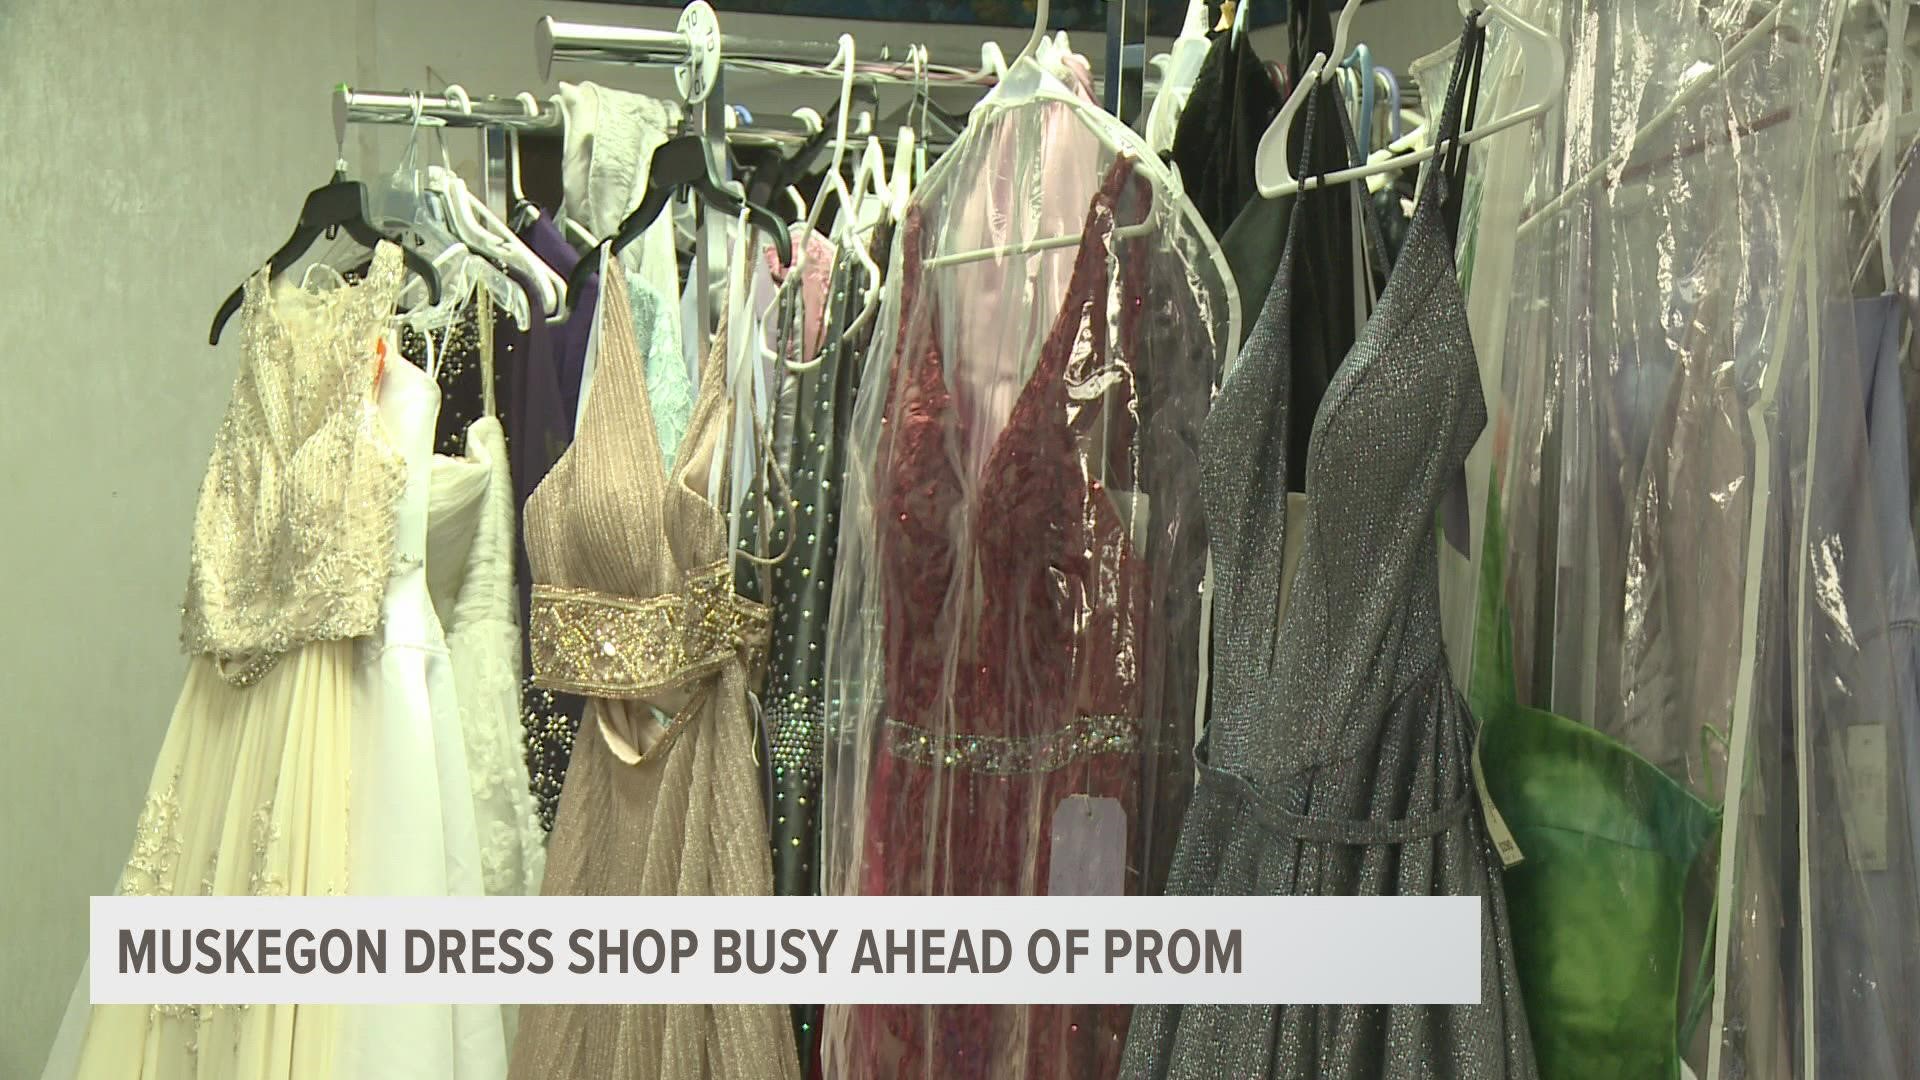 If you're struggling to find the perfect dress for prom, a business in Muskegon is here to help.